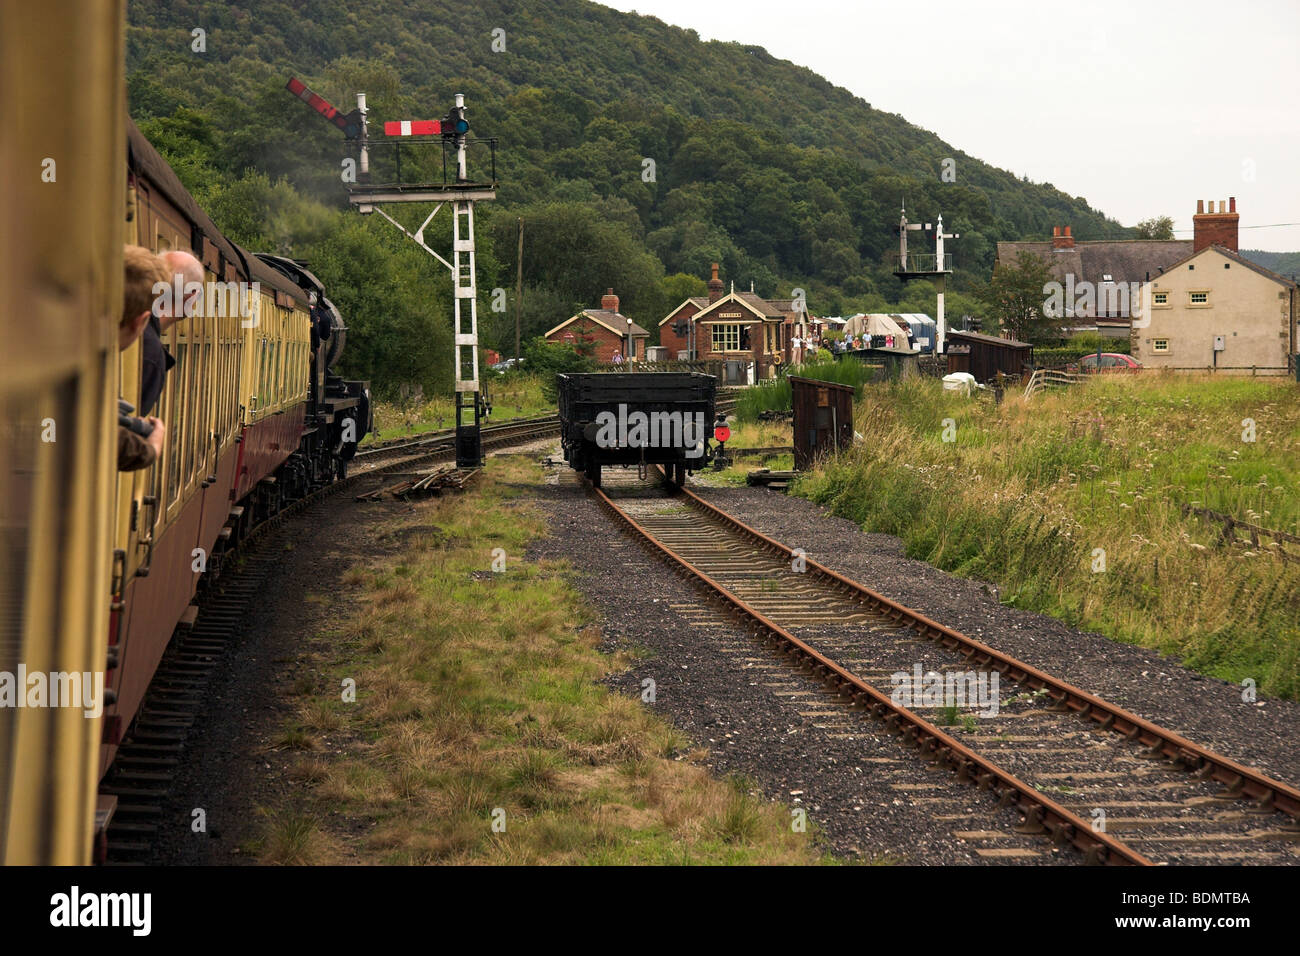 NYMR, Passengers leaning out of the window of a moving steam train, North York Moors Railway, North Yorkshire, England UK Stock Photo